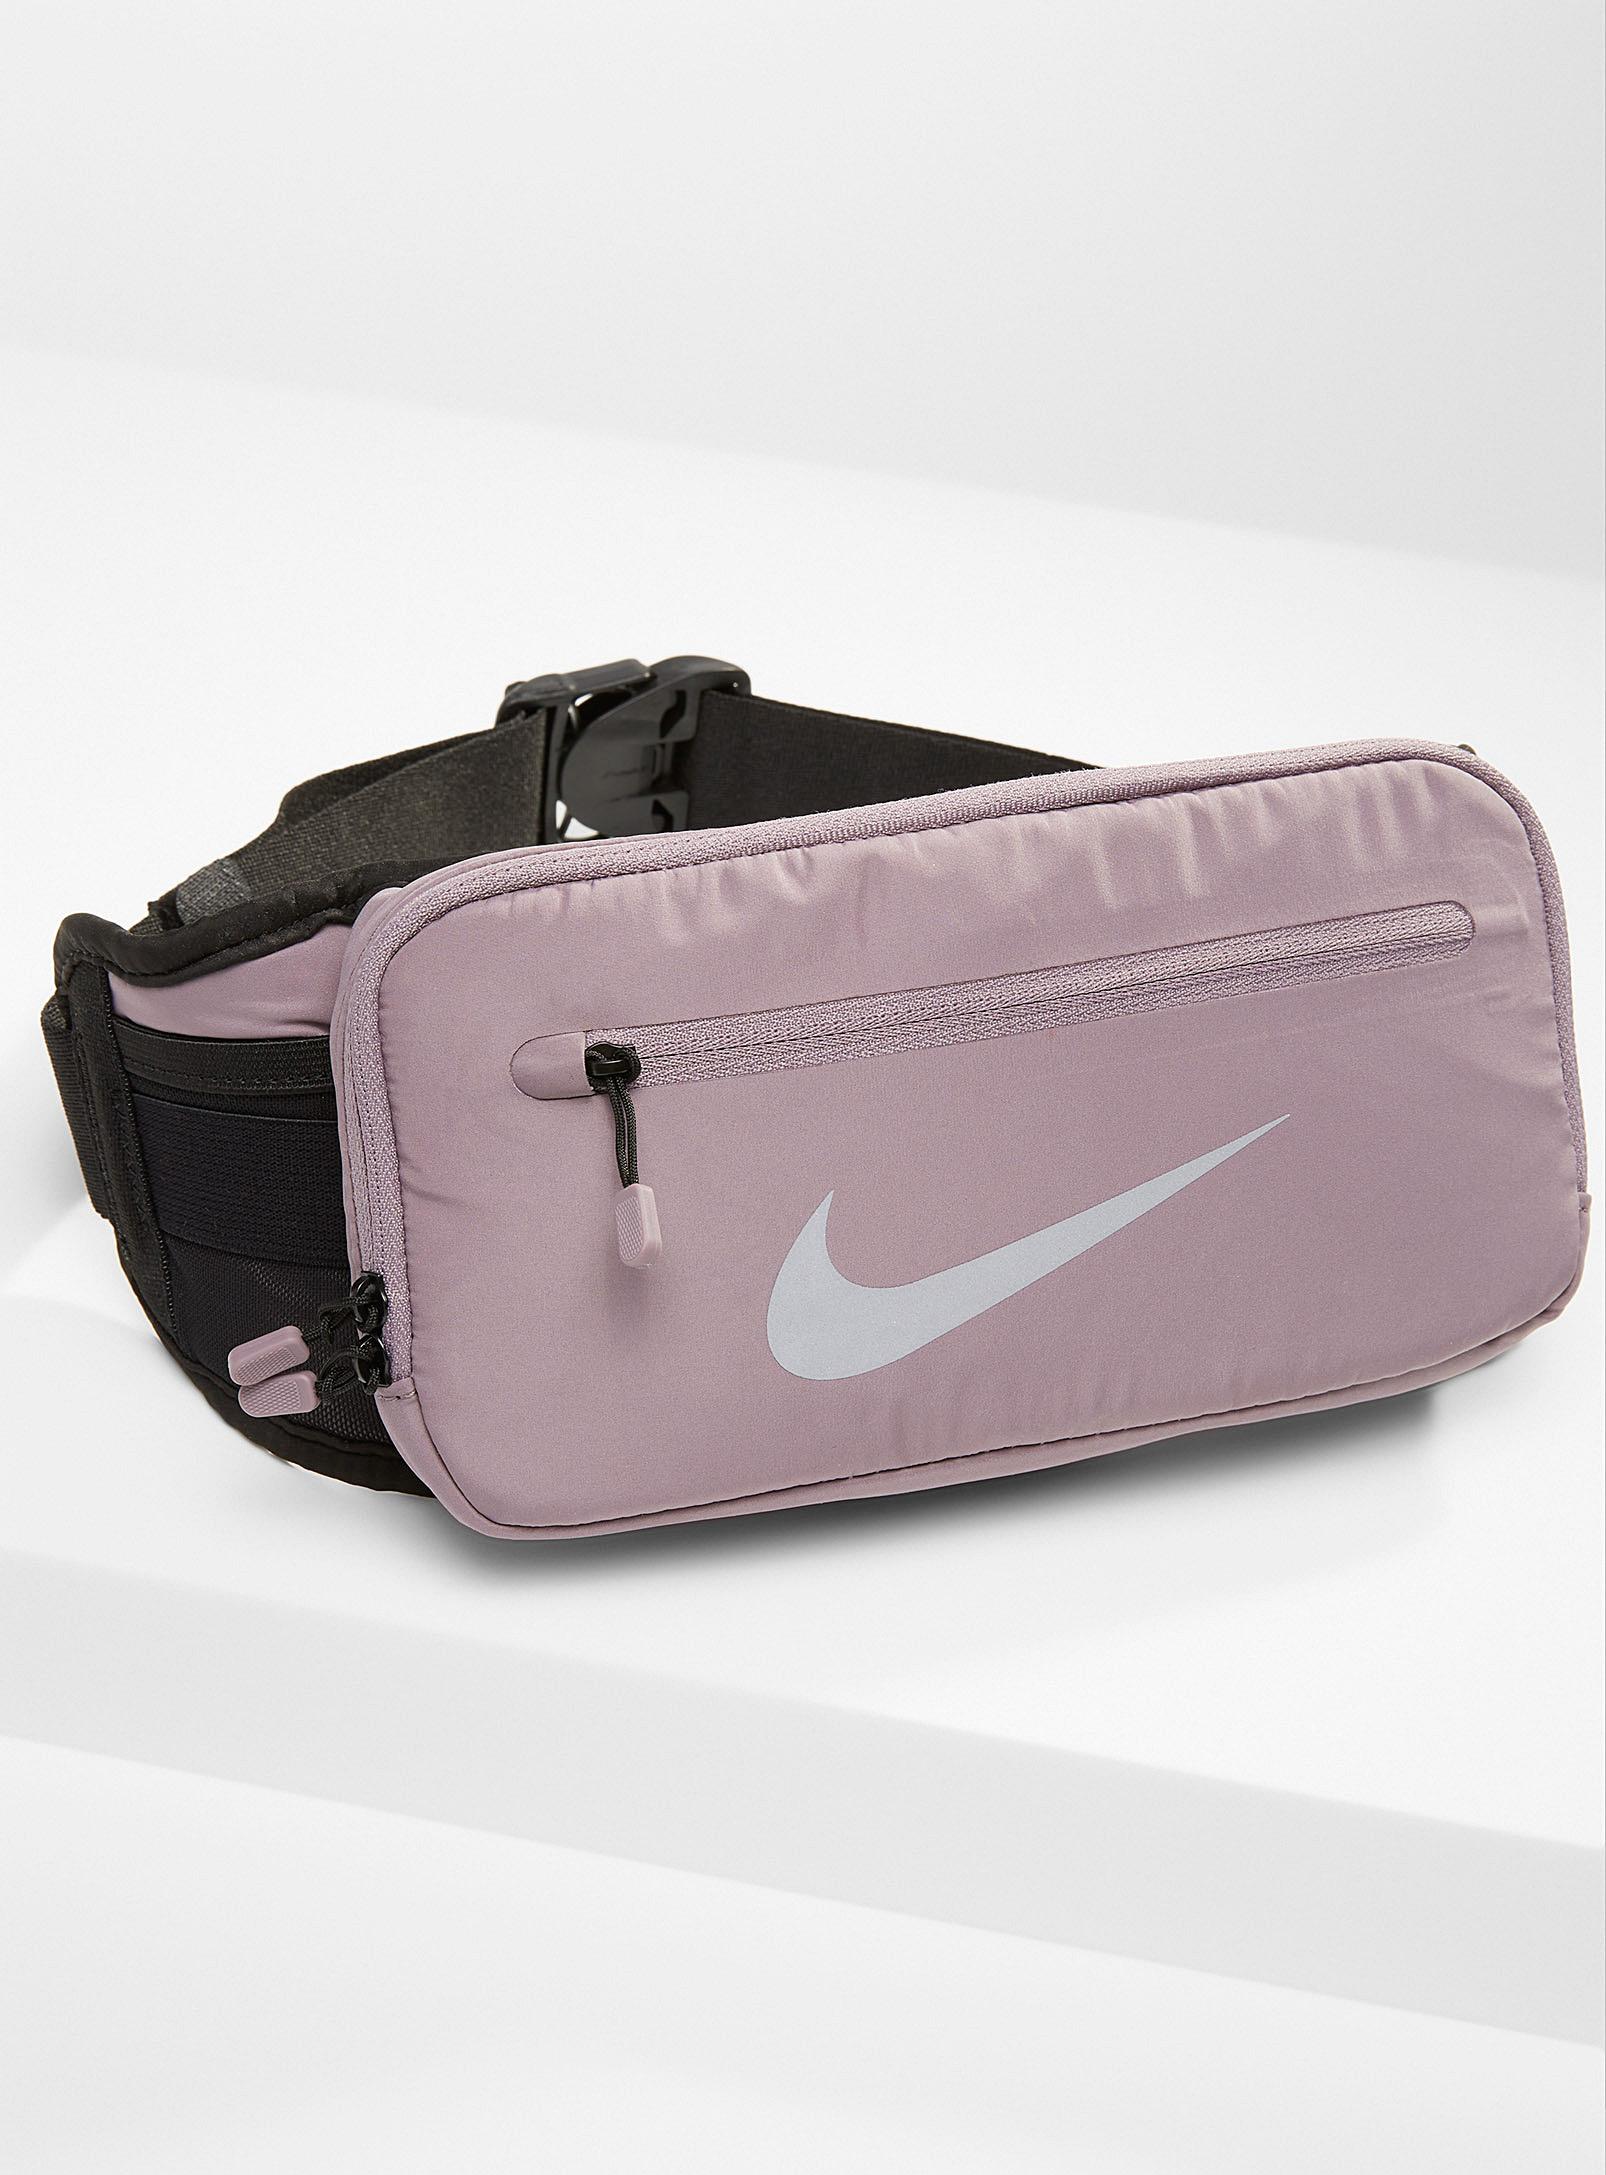 Nike Running Hip Pack in Red